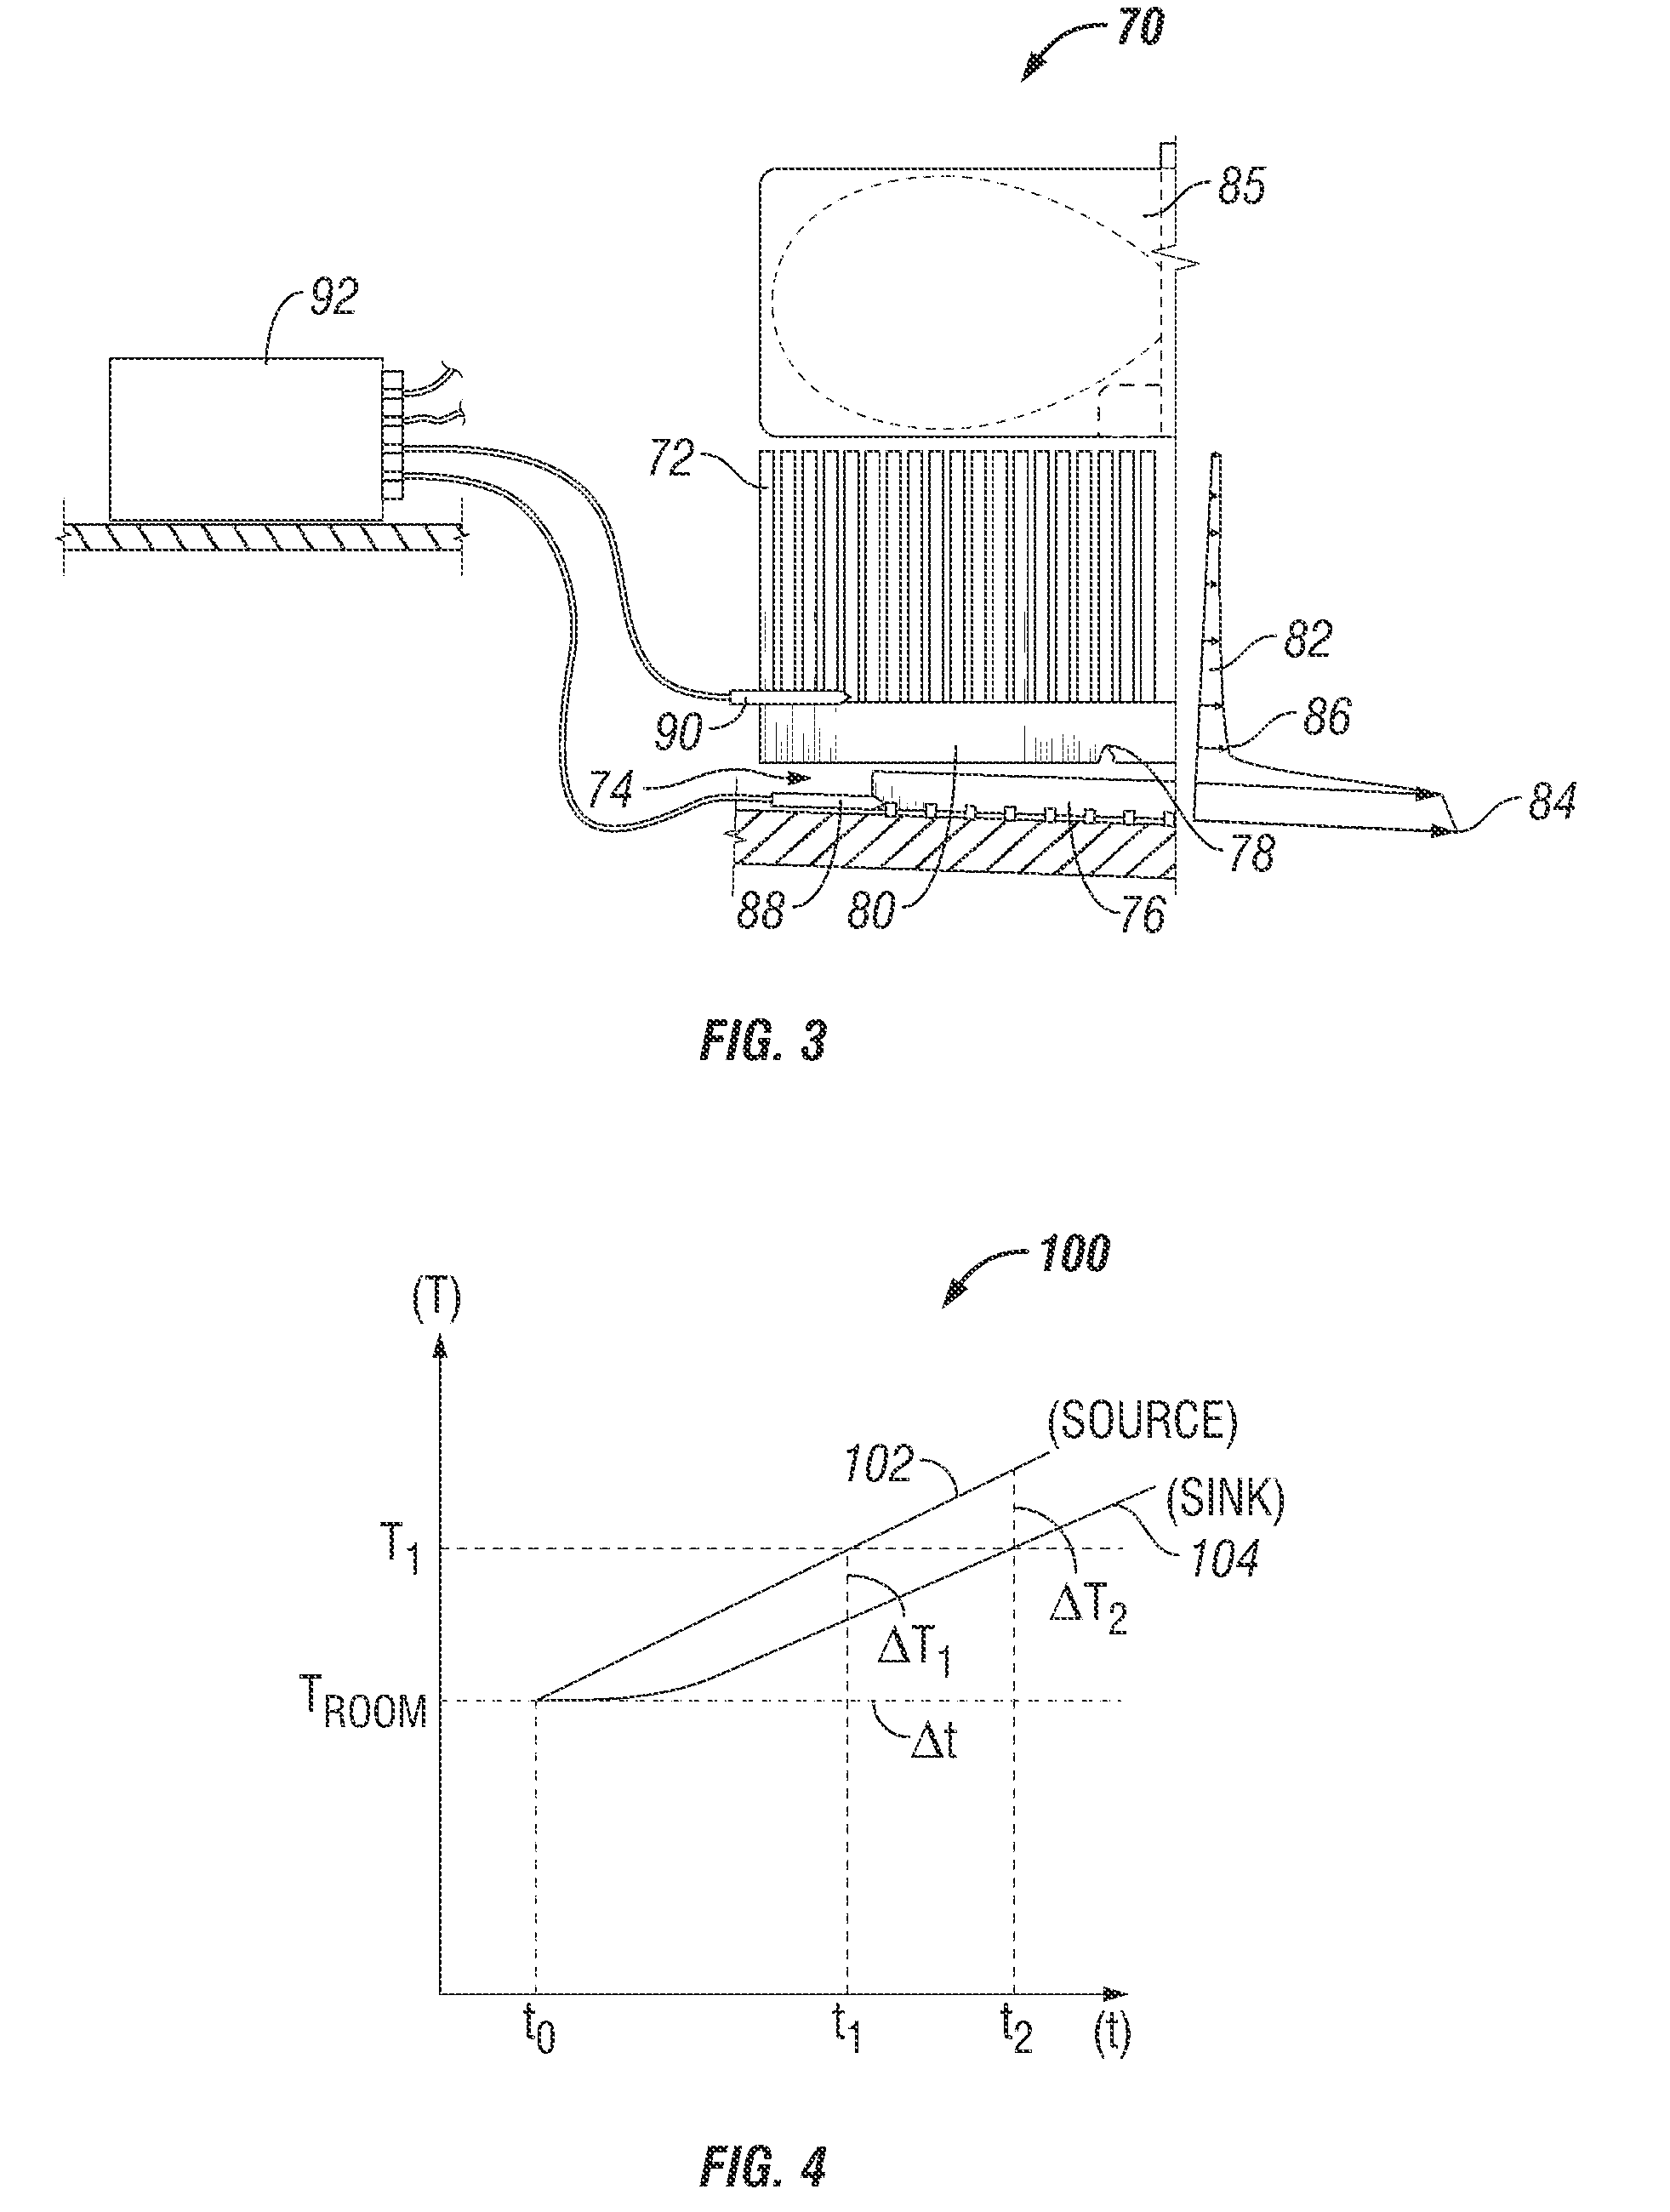 Method and apparatus for detecting heat sink faults